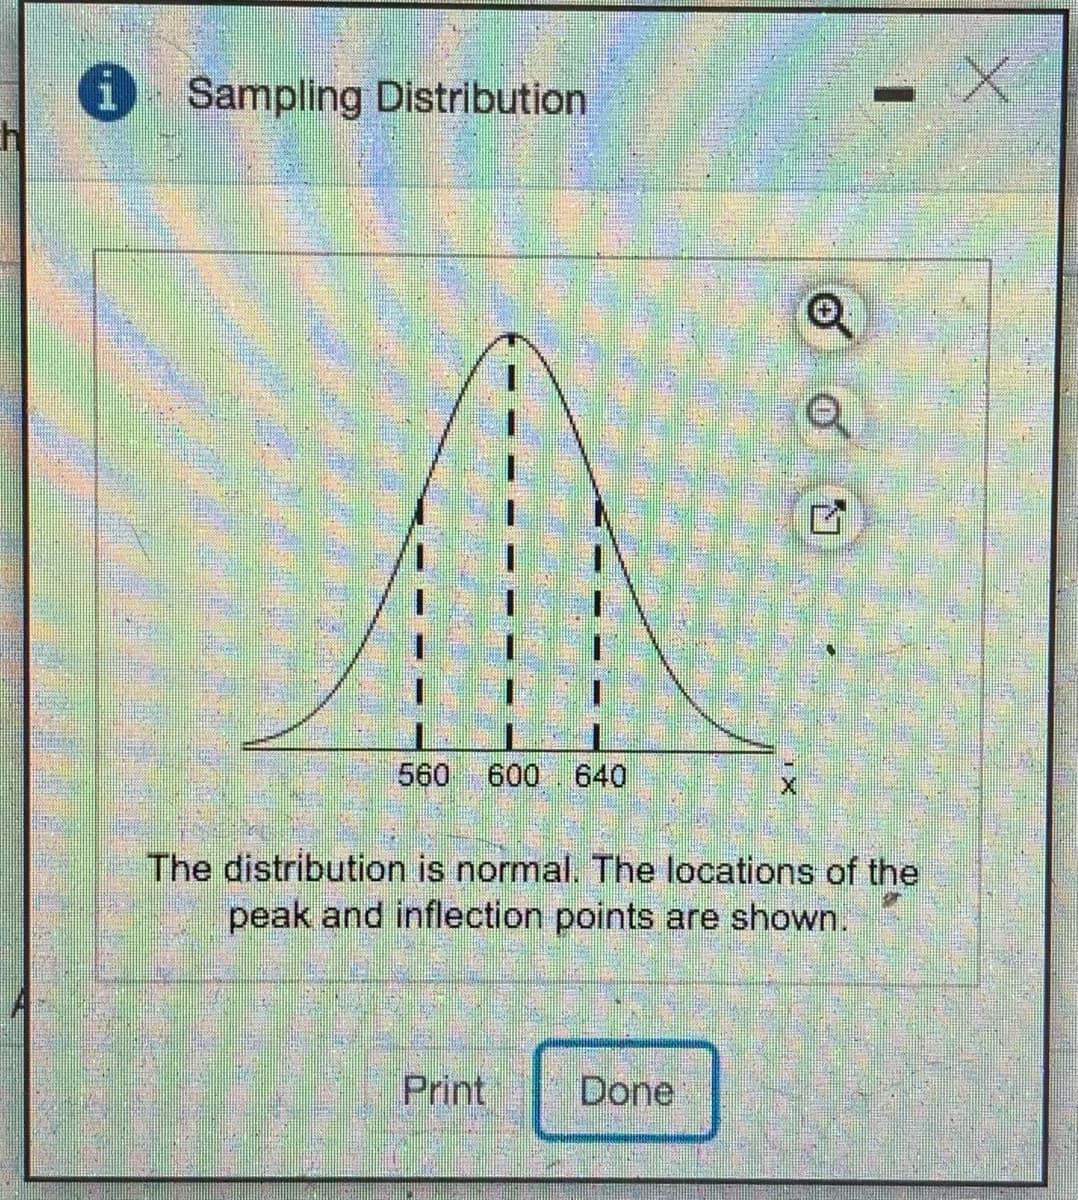 Sampling Distribution
560
600 640
The distribution is normal. The locations of the
peak and inflection points are shown.
Print
Done
